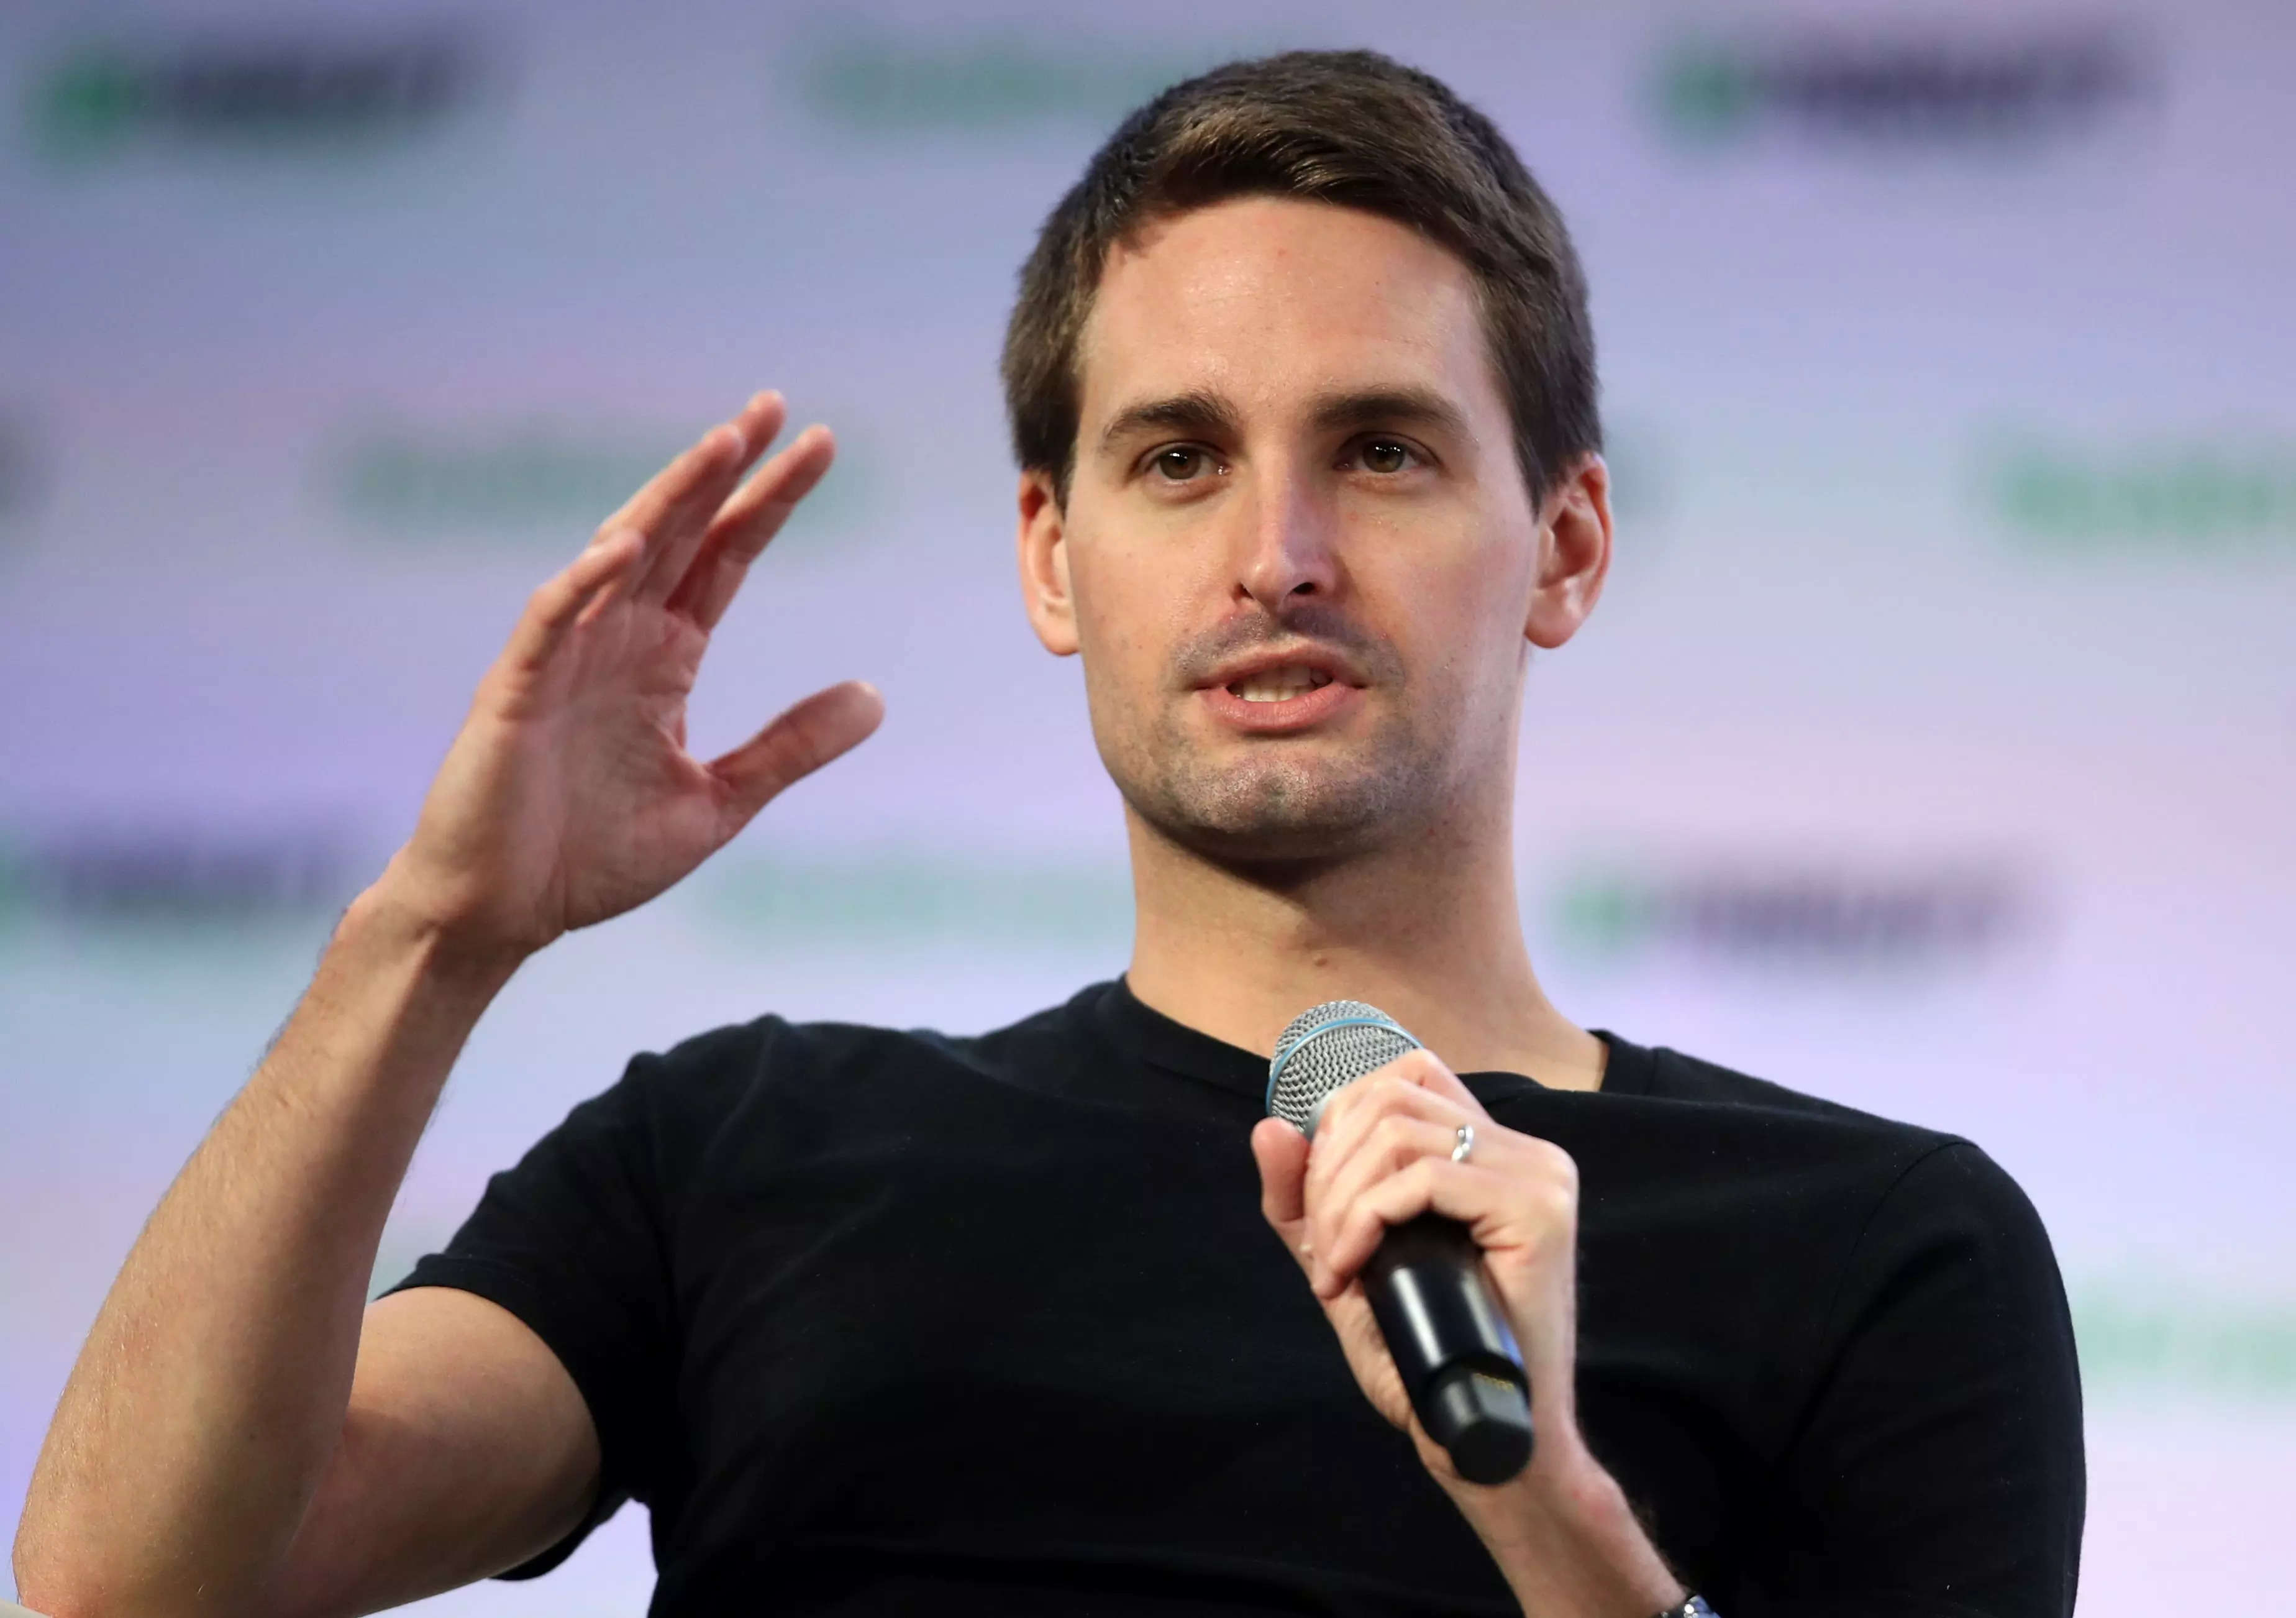 Evan Spiegel at the TechCrunch Disrupt SF 2019 conference.